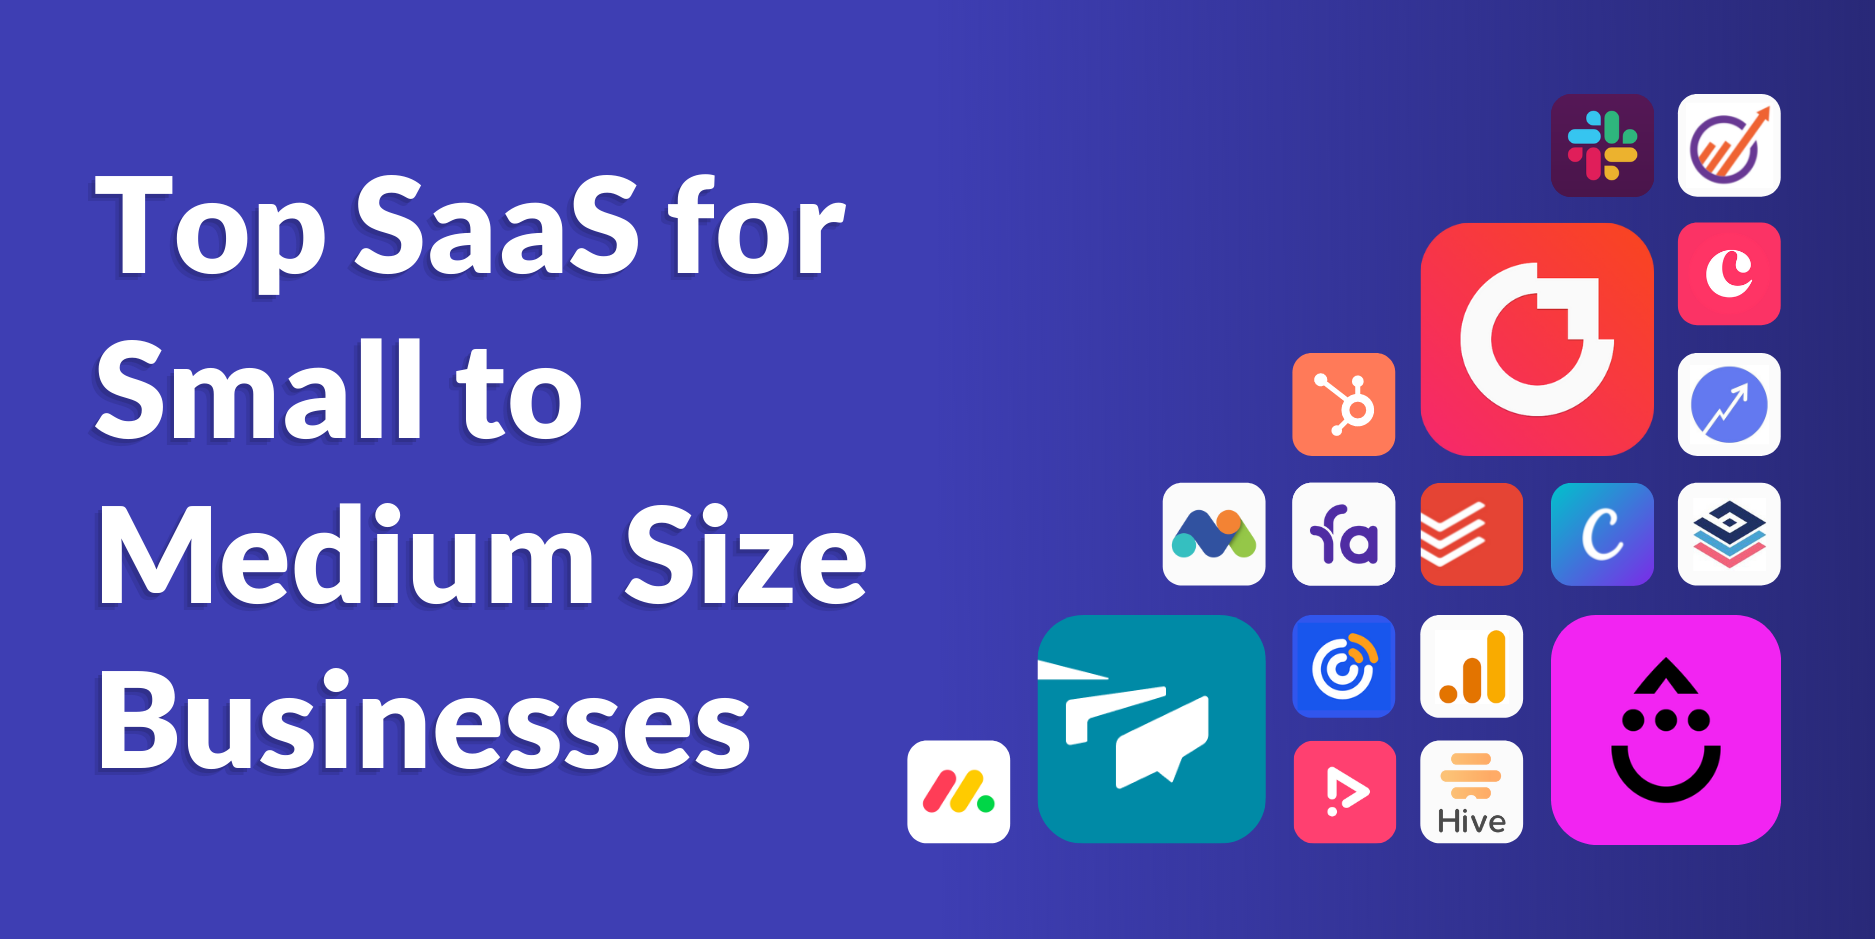 Top SaaS for Small to Medium Size Businesses